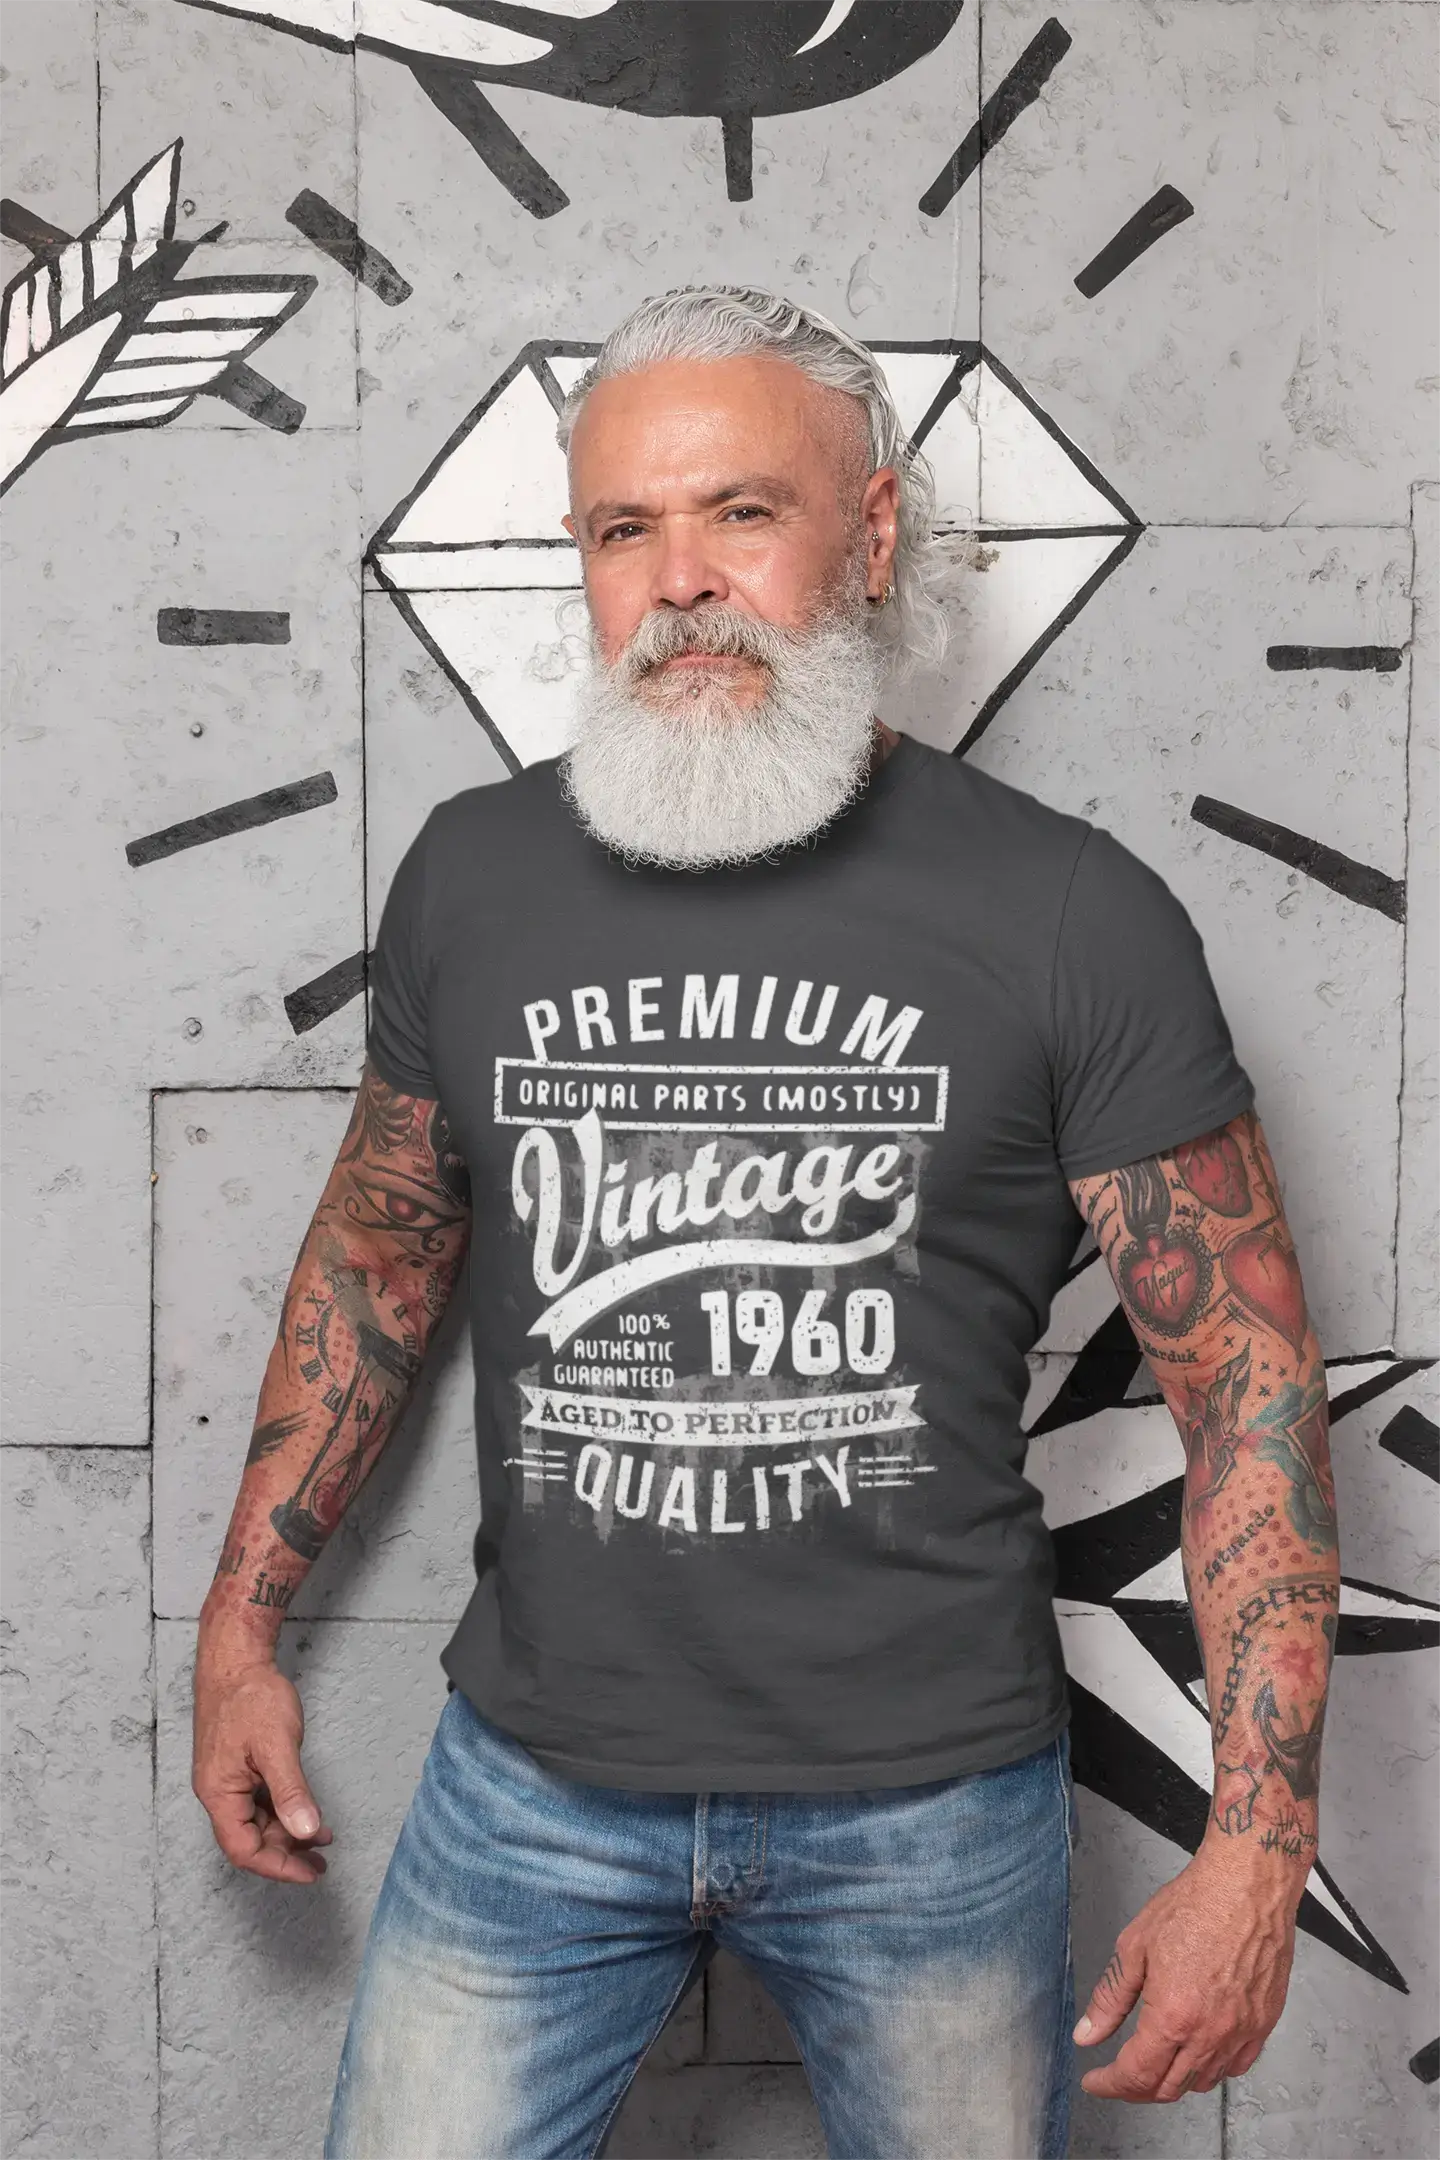 ULTRABASIC - Graphic Men's 1960 Aged to Perfection Birthday Gift T-Shirt